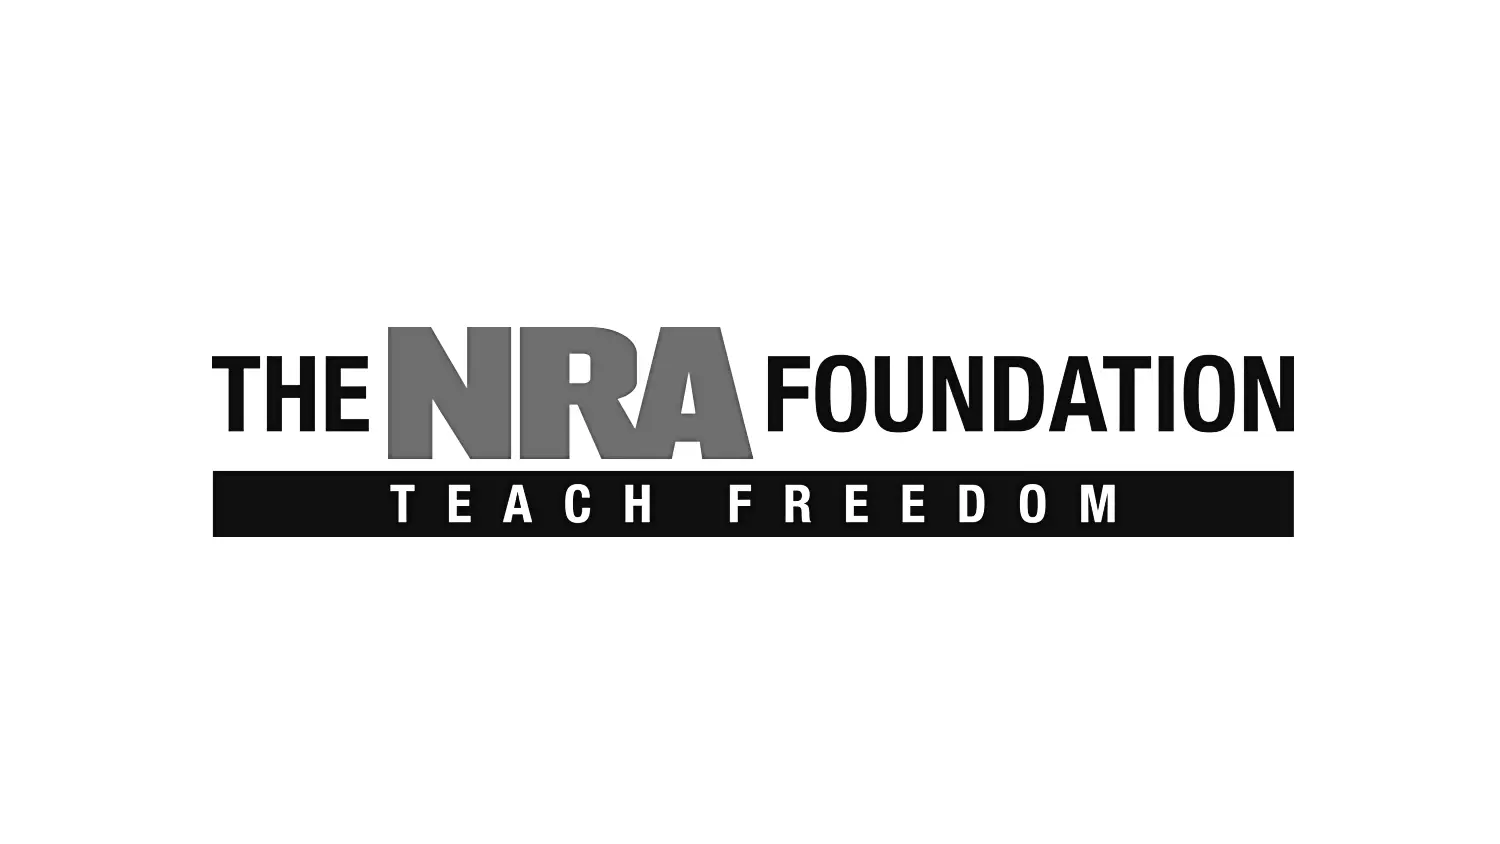 NRA Competitive Shooting